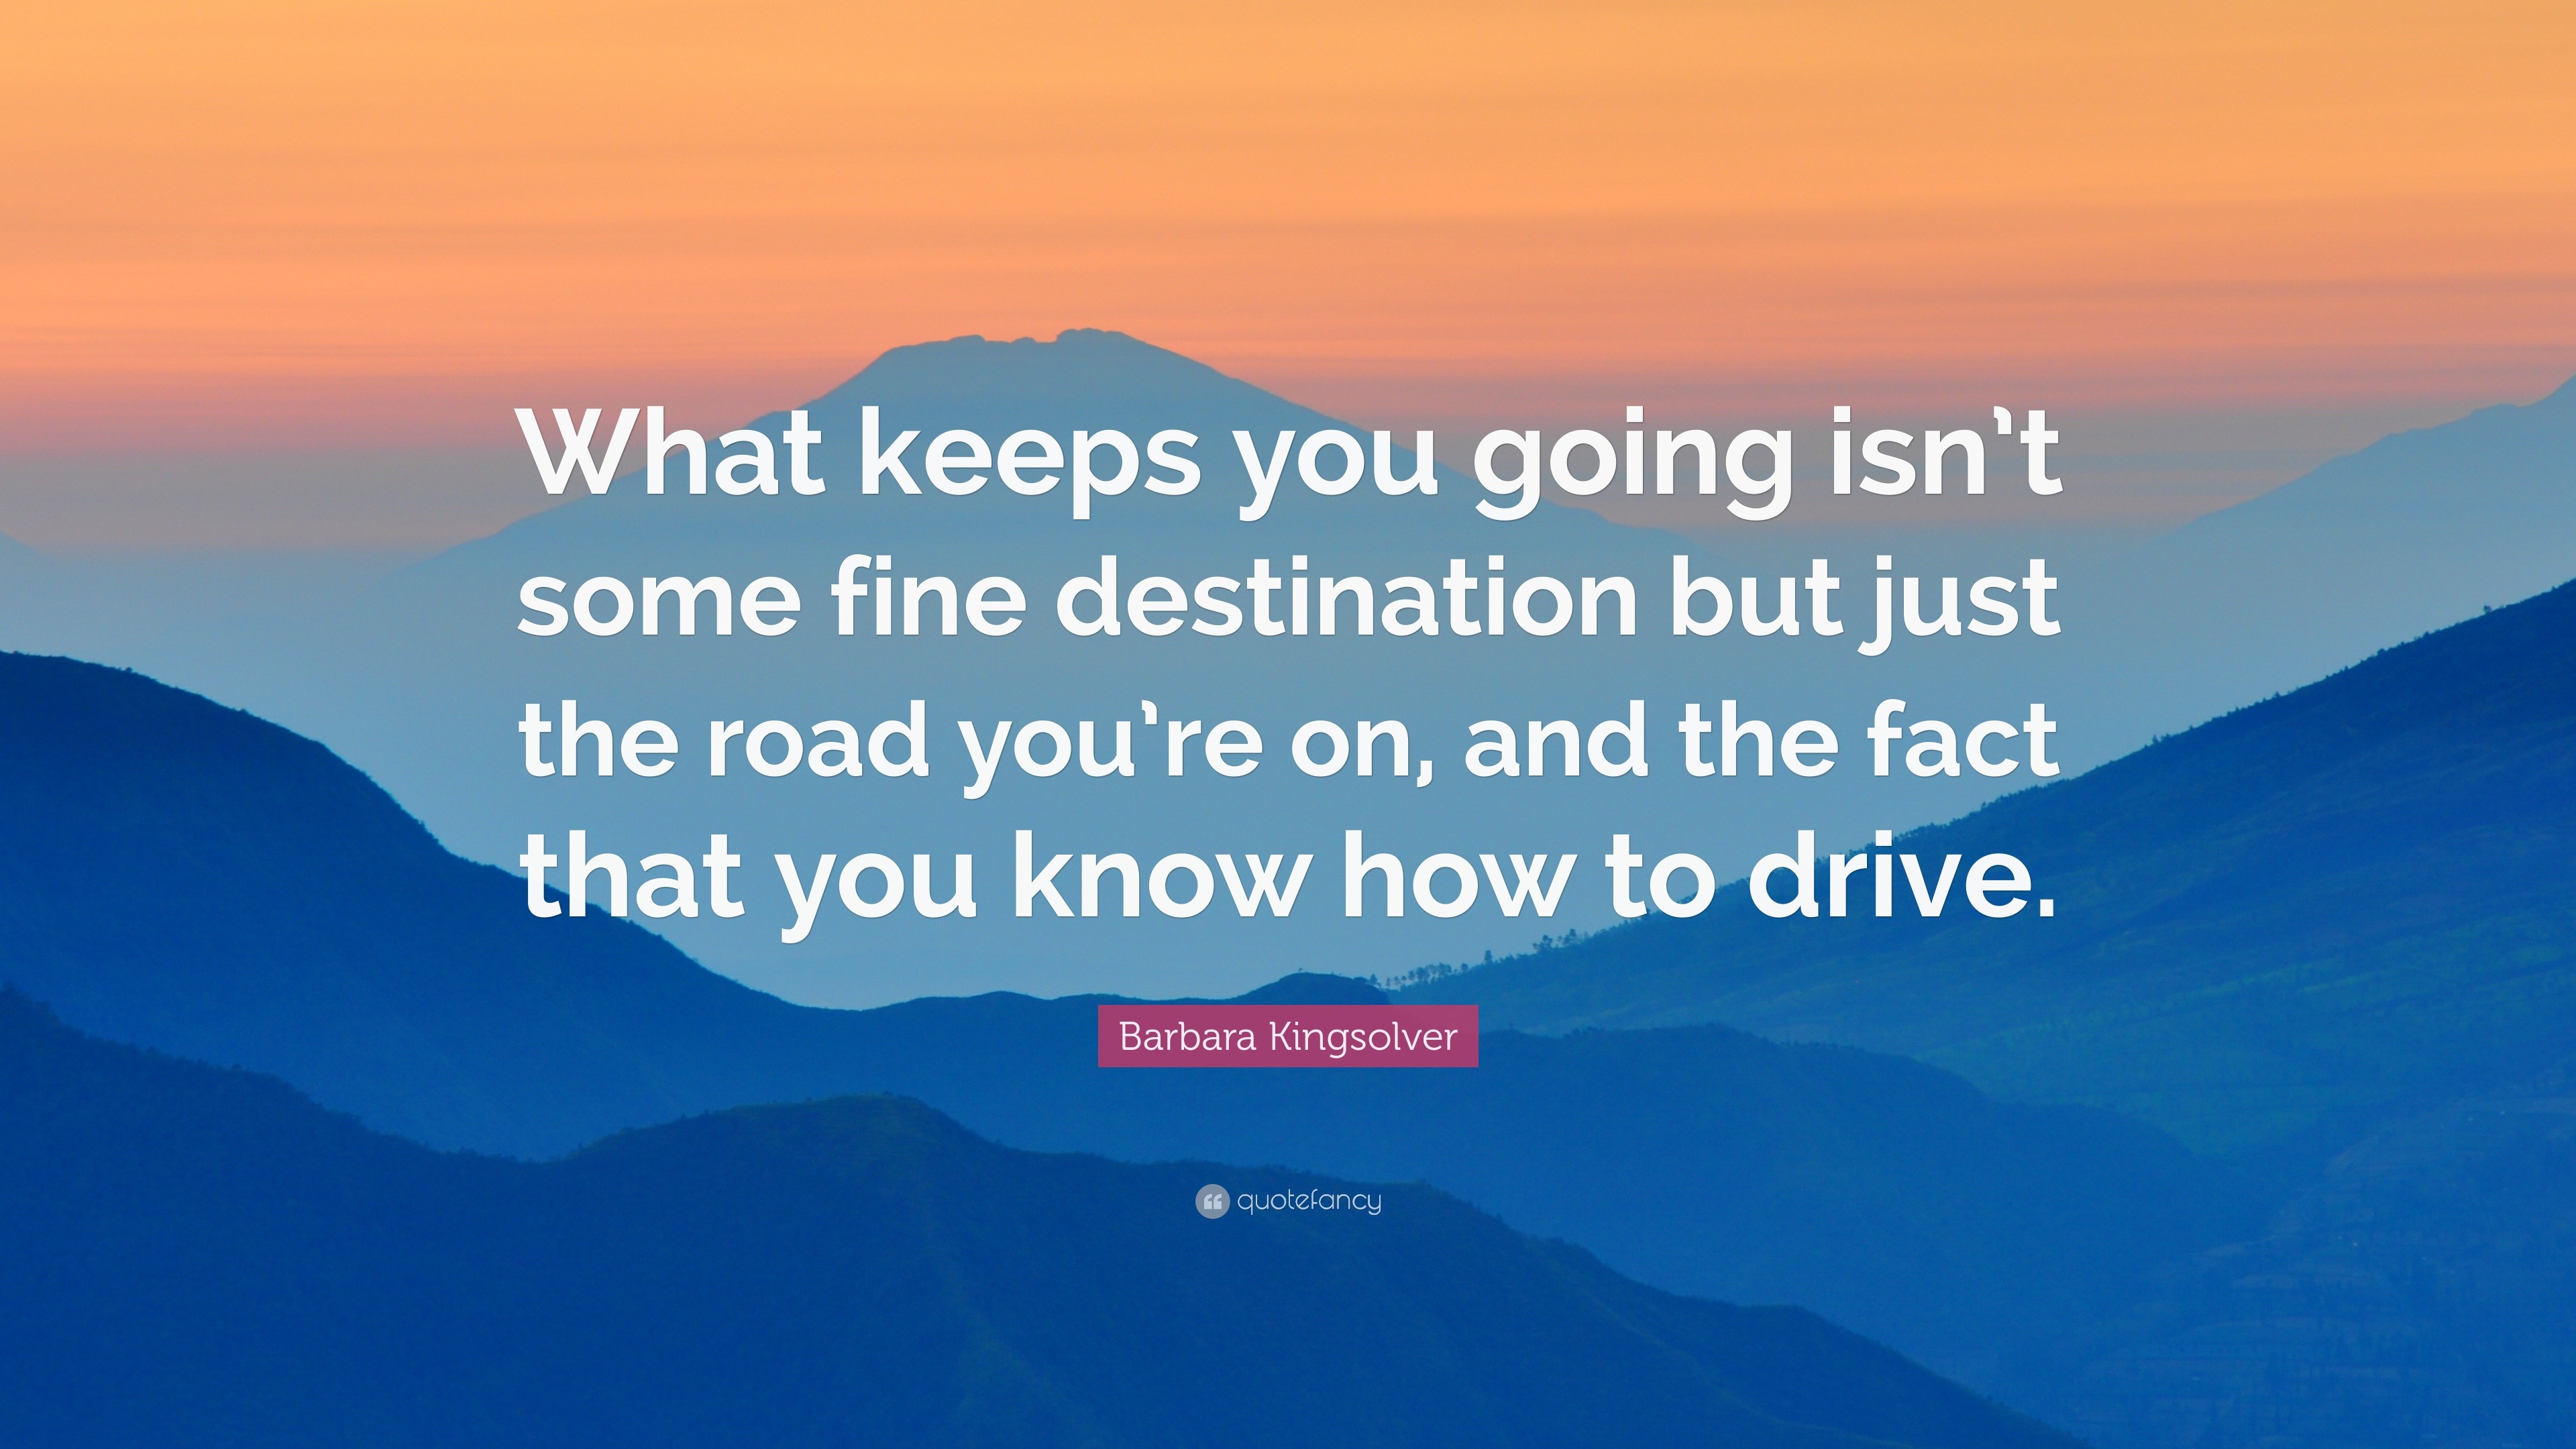 Barbara Kingsolver Quote: “What keeps you going isn’t some fine ...